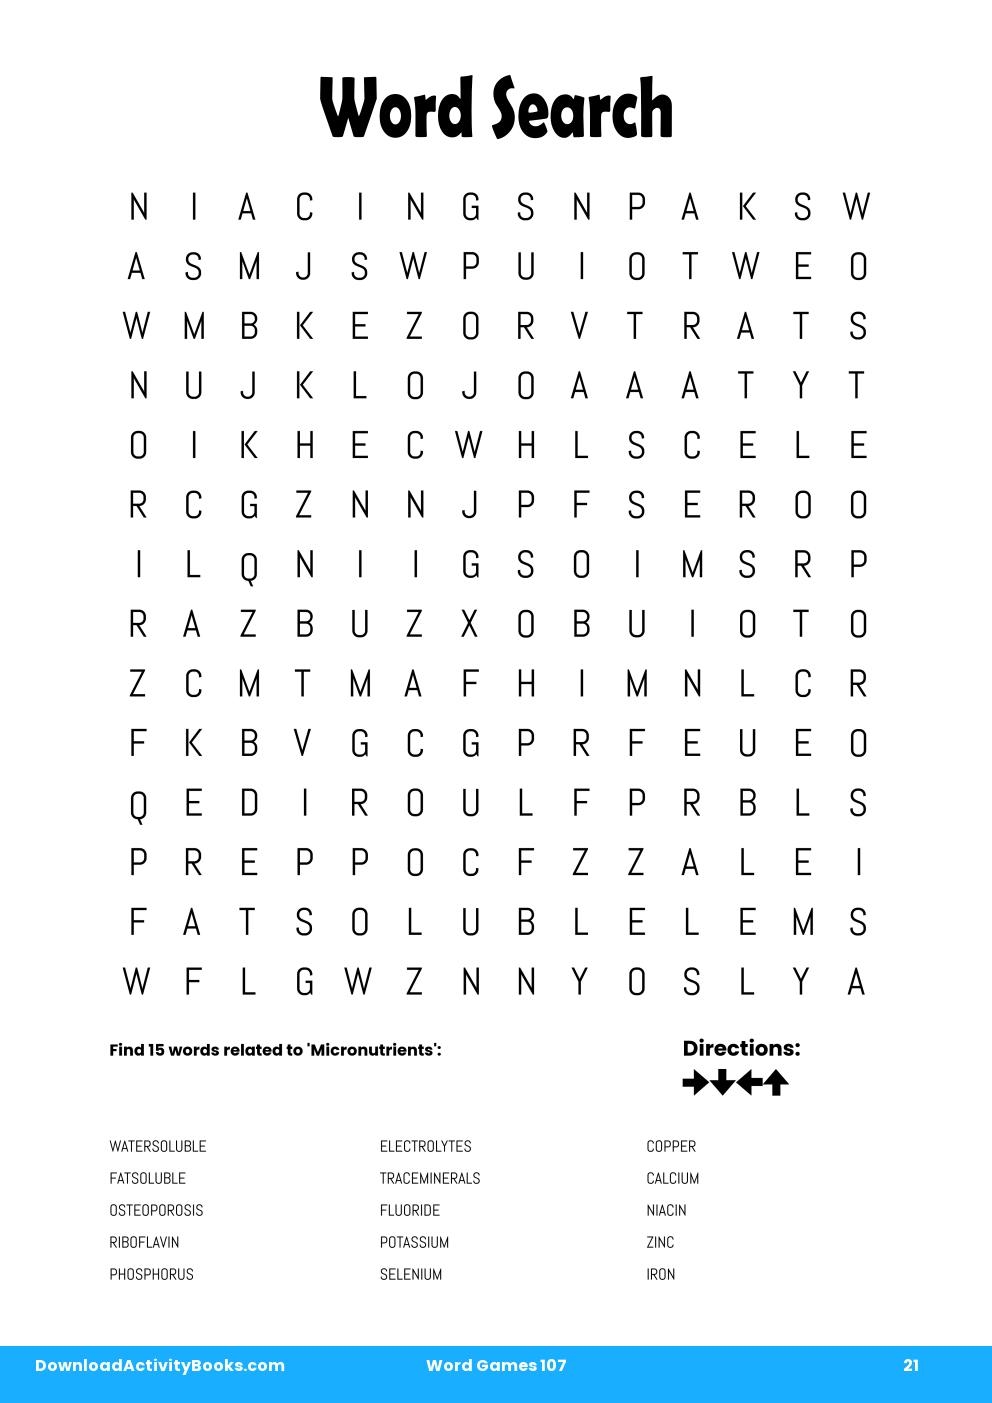 Word Search in Word Games 107